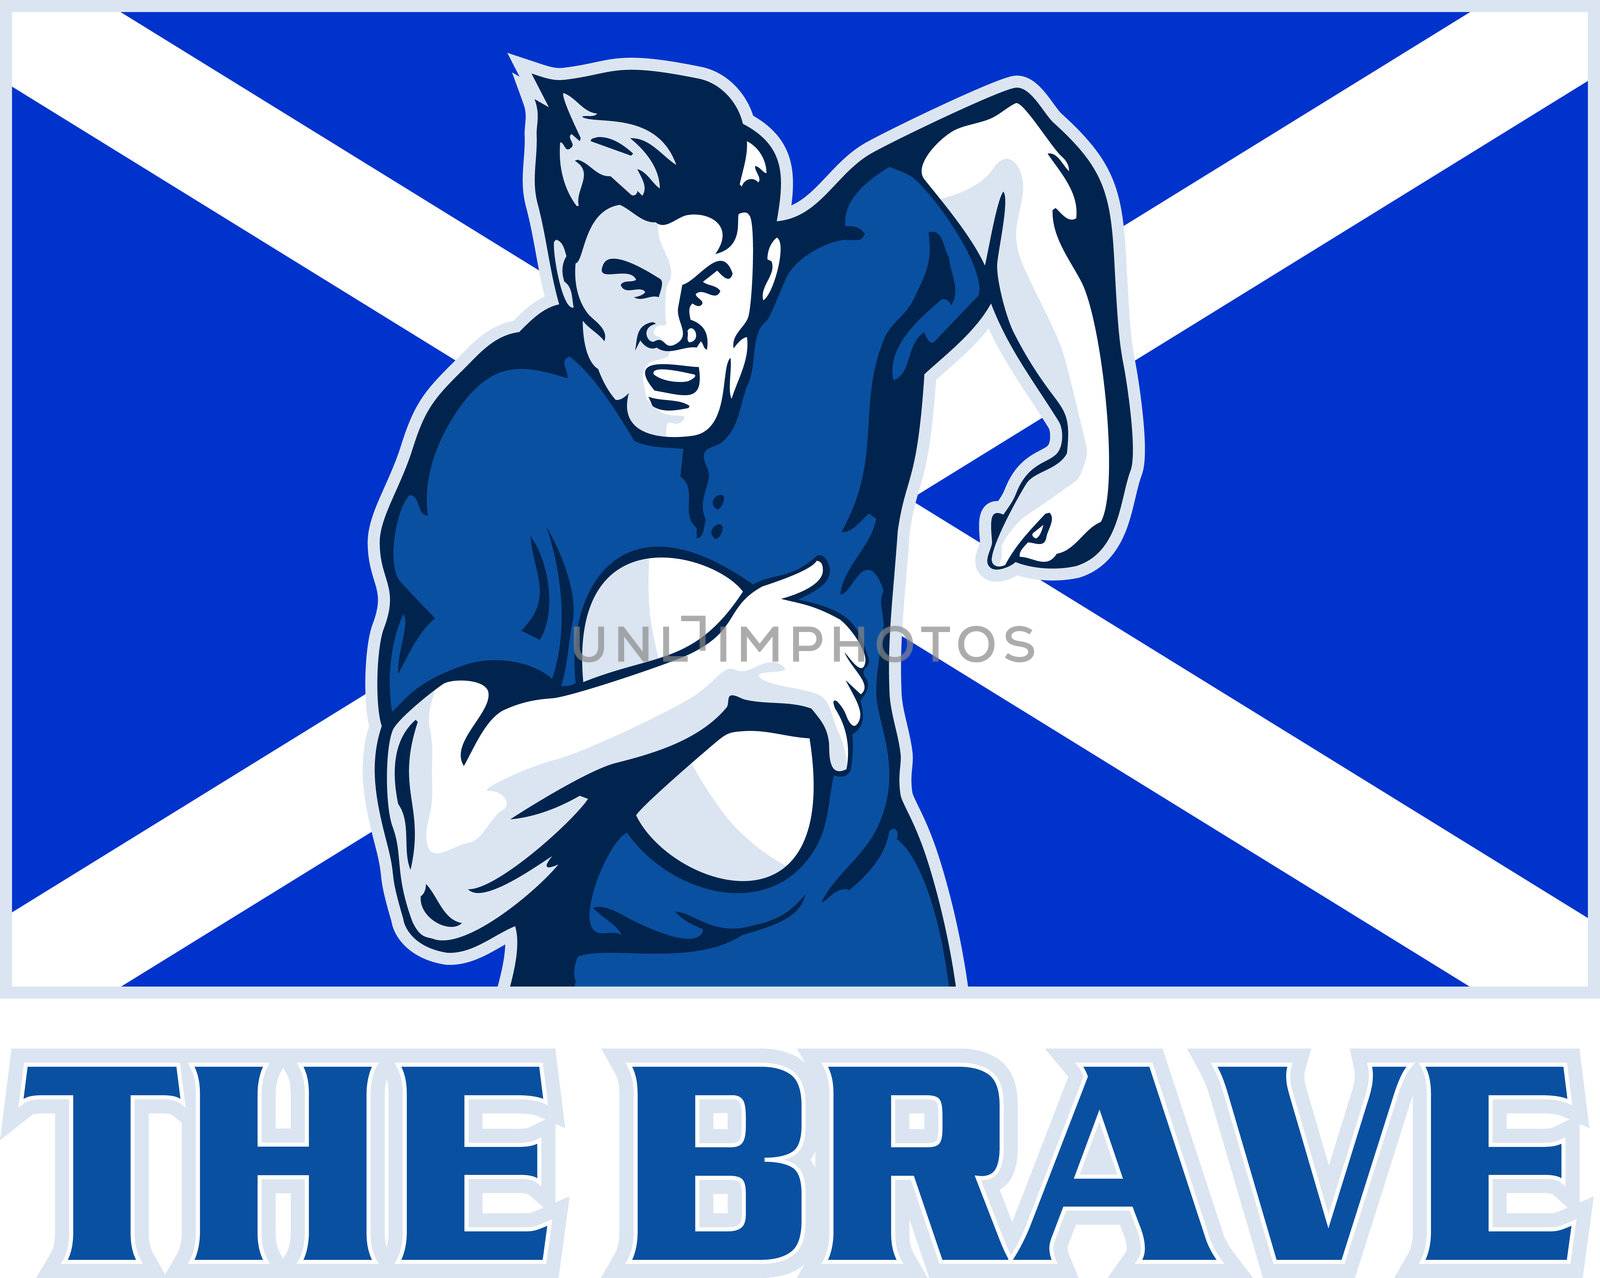 illustration of a Scottish rugby player running with the ball facing front view with Scotland flag in background with words "the brave"